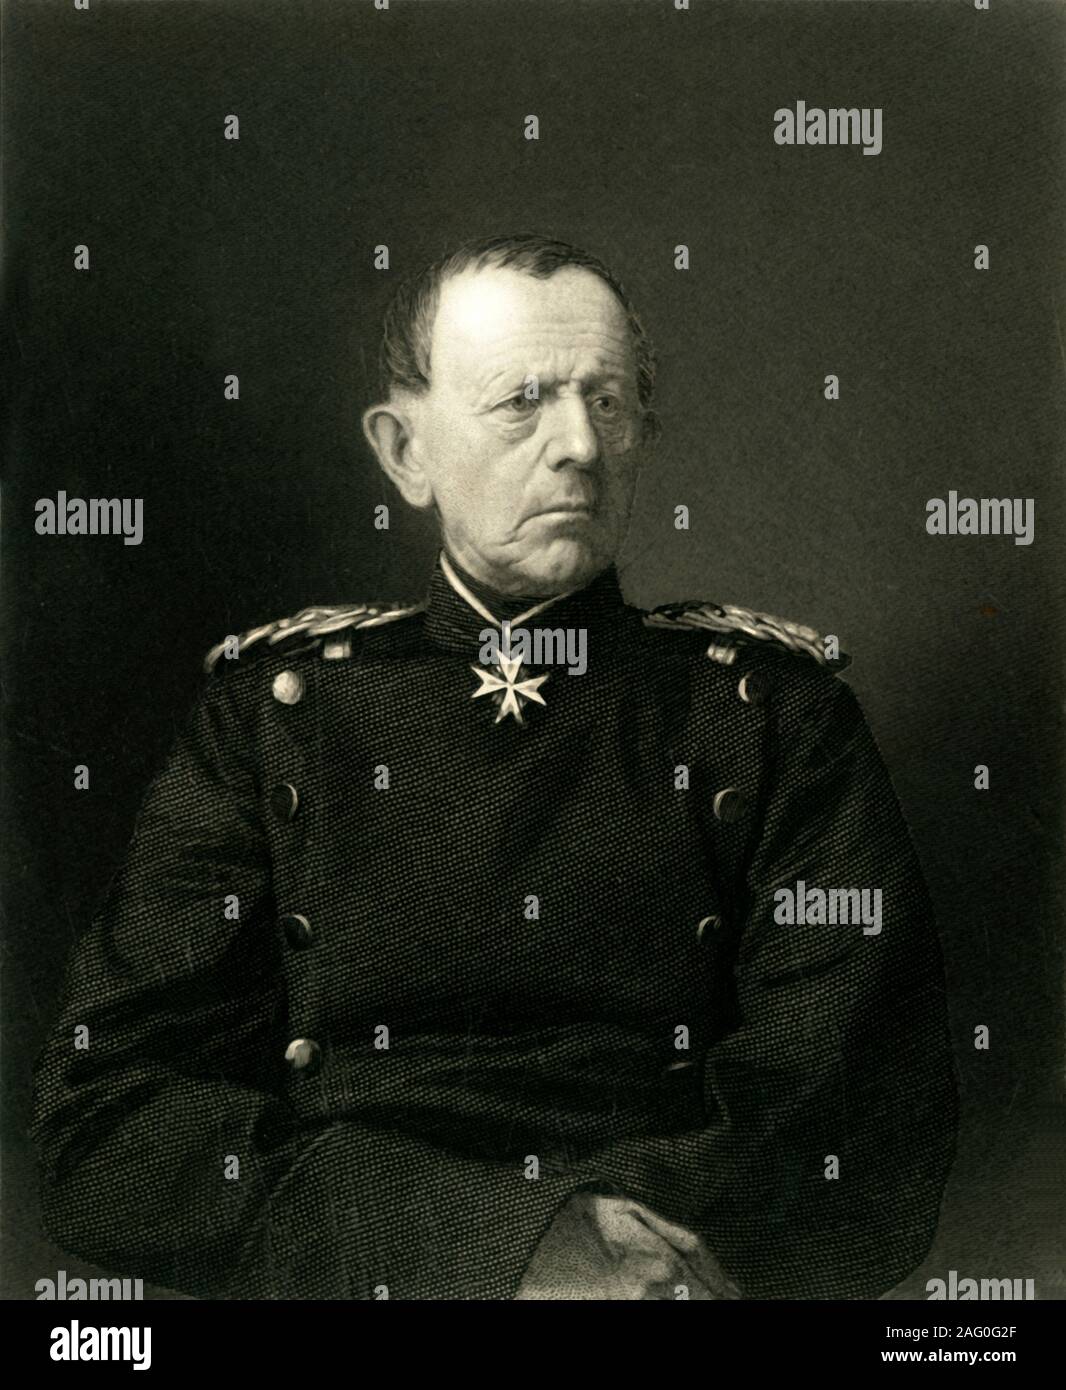 'General von Moltke', c1872. Portrait of German field marshal Helmuth von Moltke (1800-1891). The chief of staff of the Prussian Army for thirty years, he is regarded as the creator of a new, more modern method of directing armies in the field. From &quot;The Franco-Prussian War: its causes, incidents and consequences&quot;, Volume I, by Captain H M Hozier. [William Mackenzie, London, 1872] Stock Photo